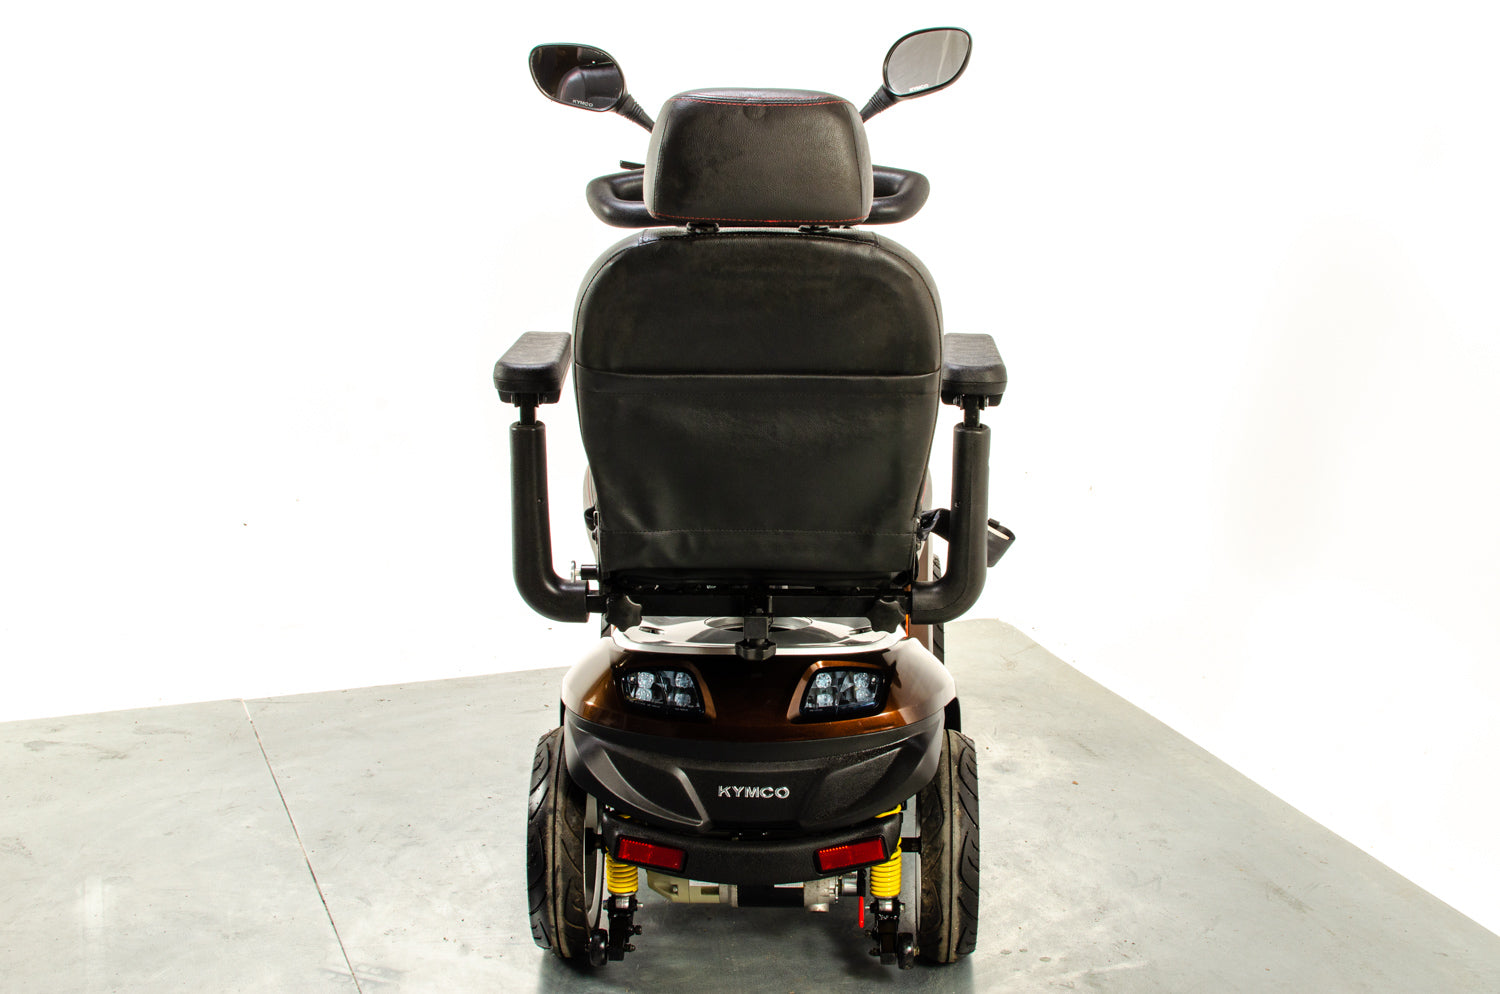 Kymco Agility Midsize Luxury Mobility Scooter 8mph 2 miles from new